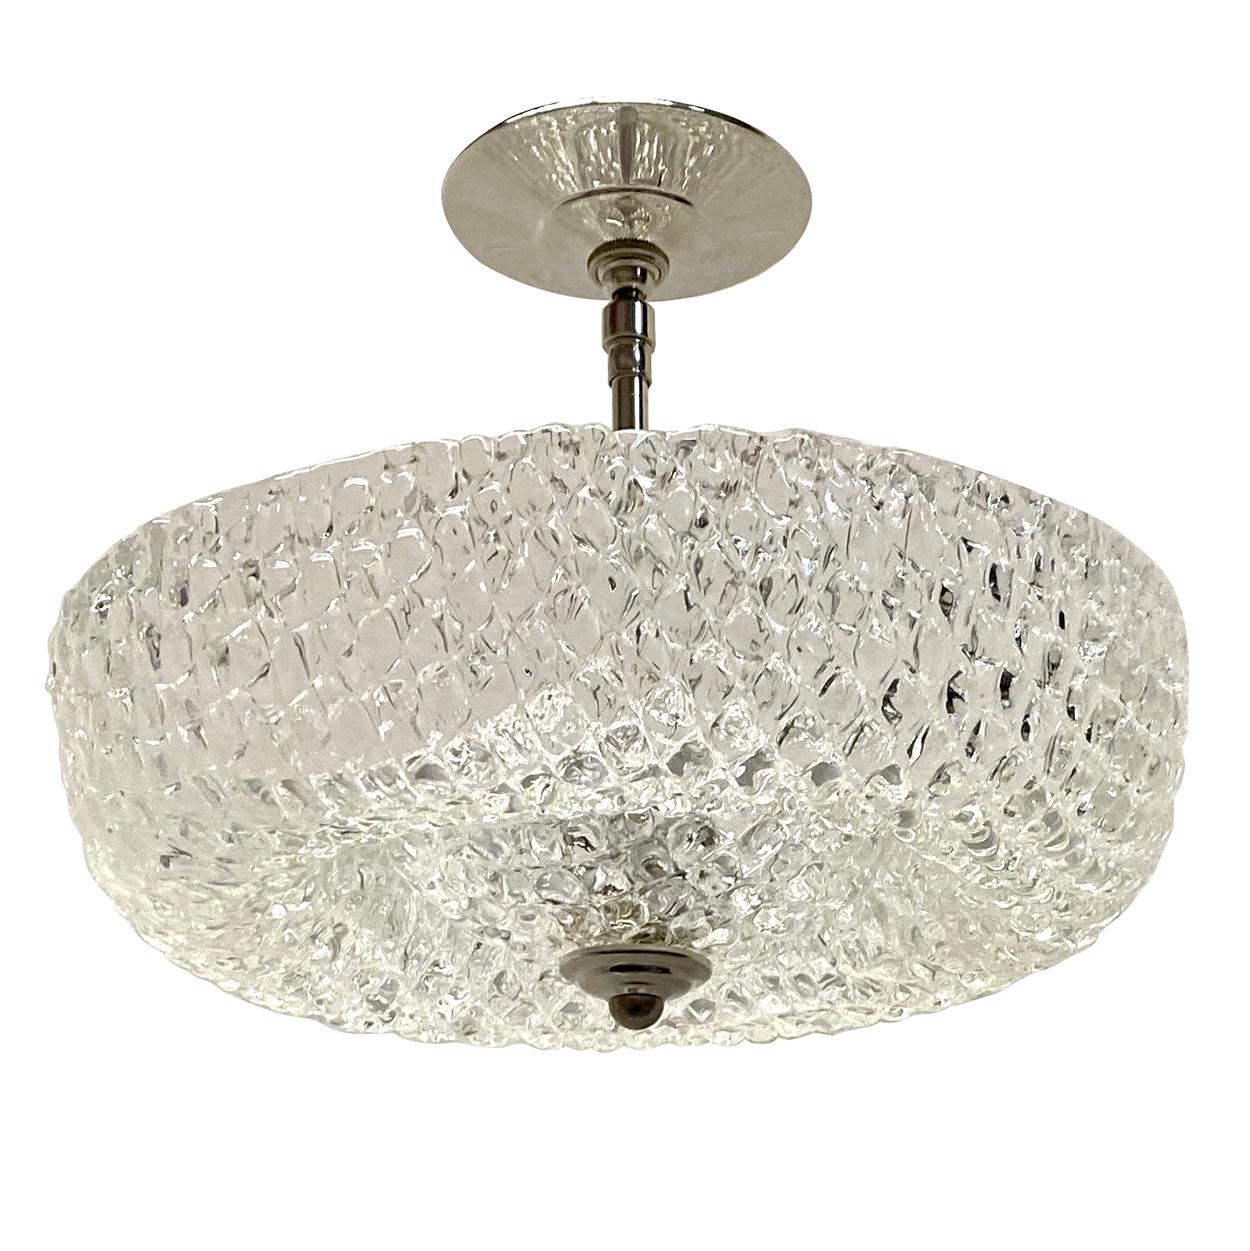 Set of Murano Pendant Light Fixtures, Sold Individually